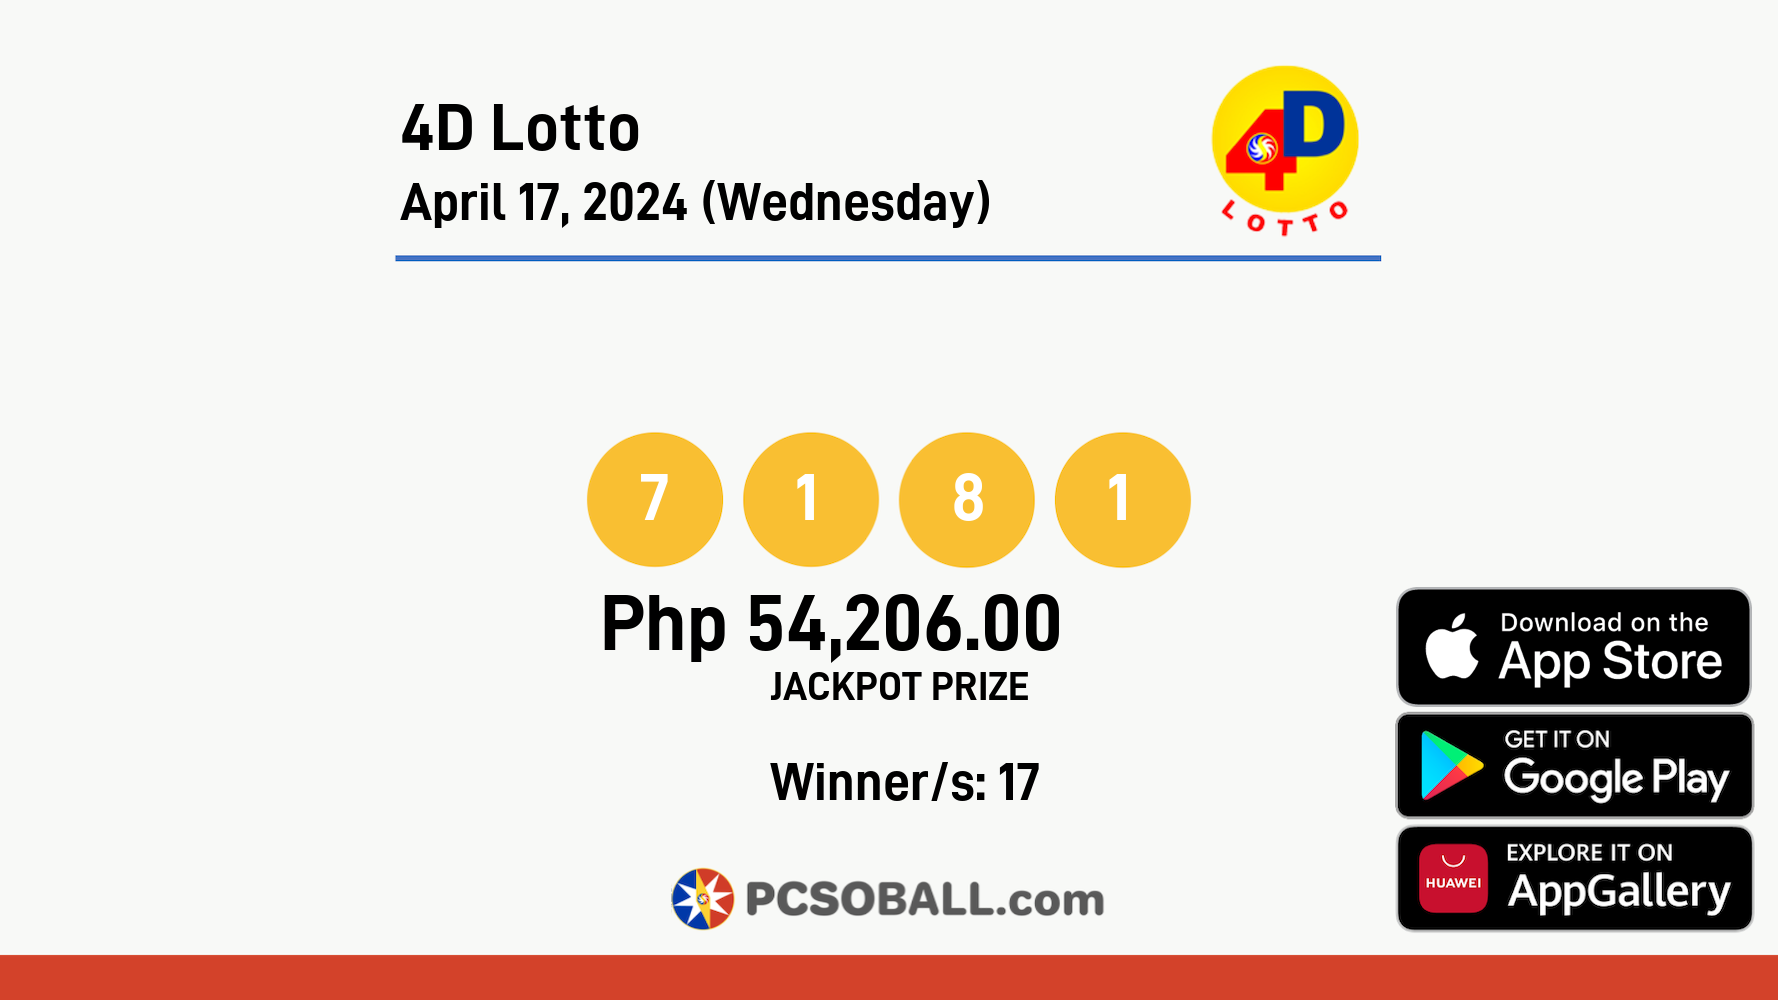 4D Lotto April 17, 2024 (Wednesday) Result